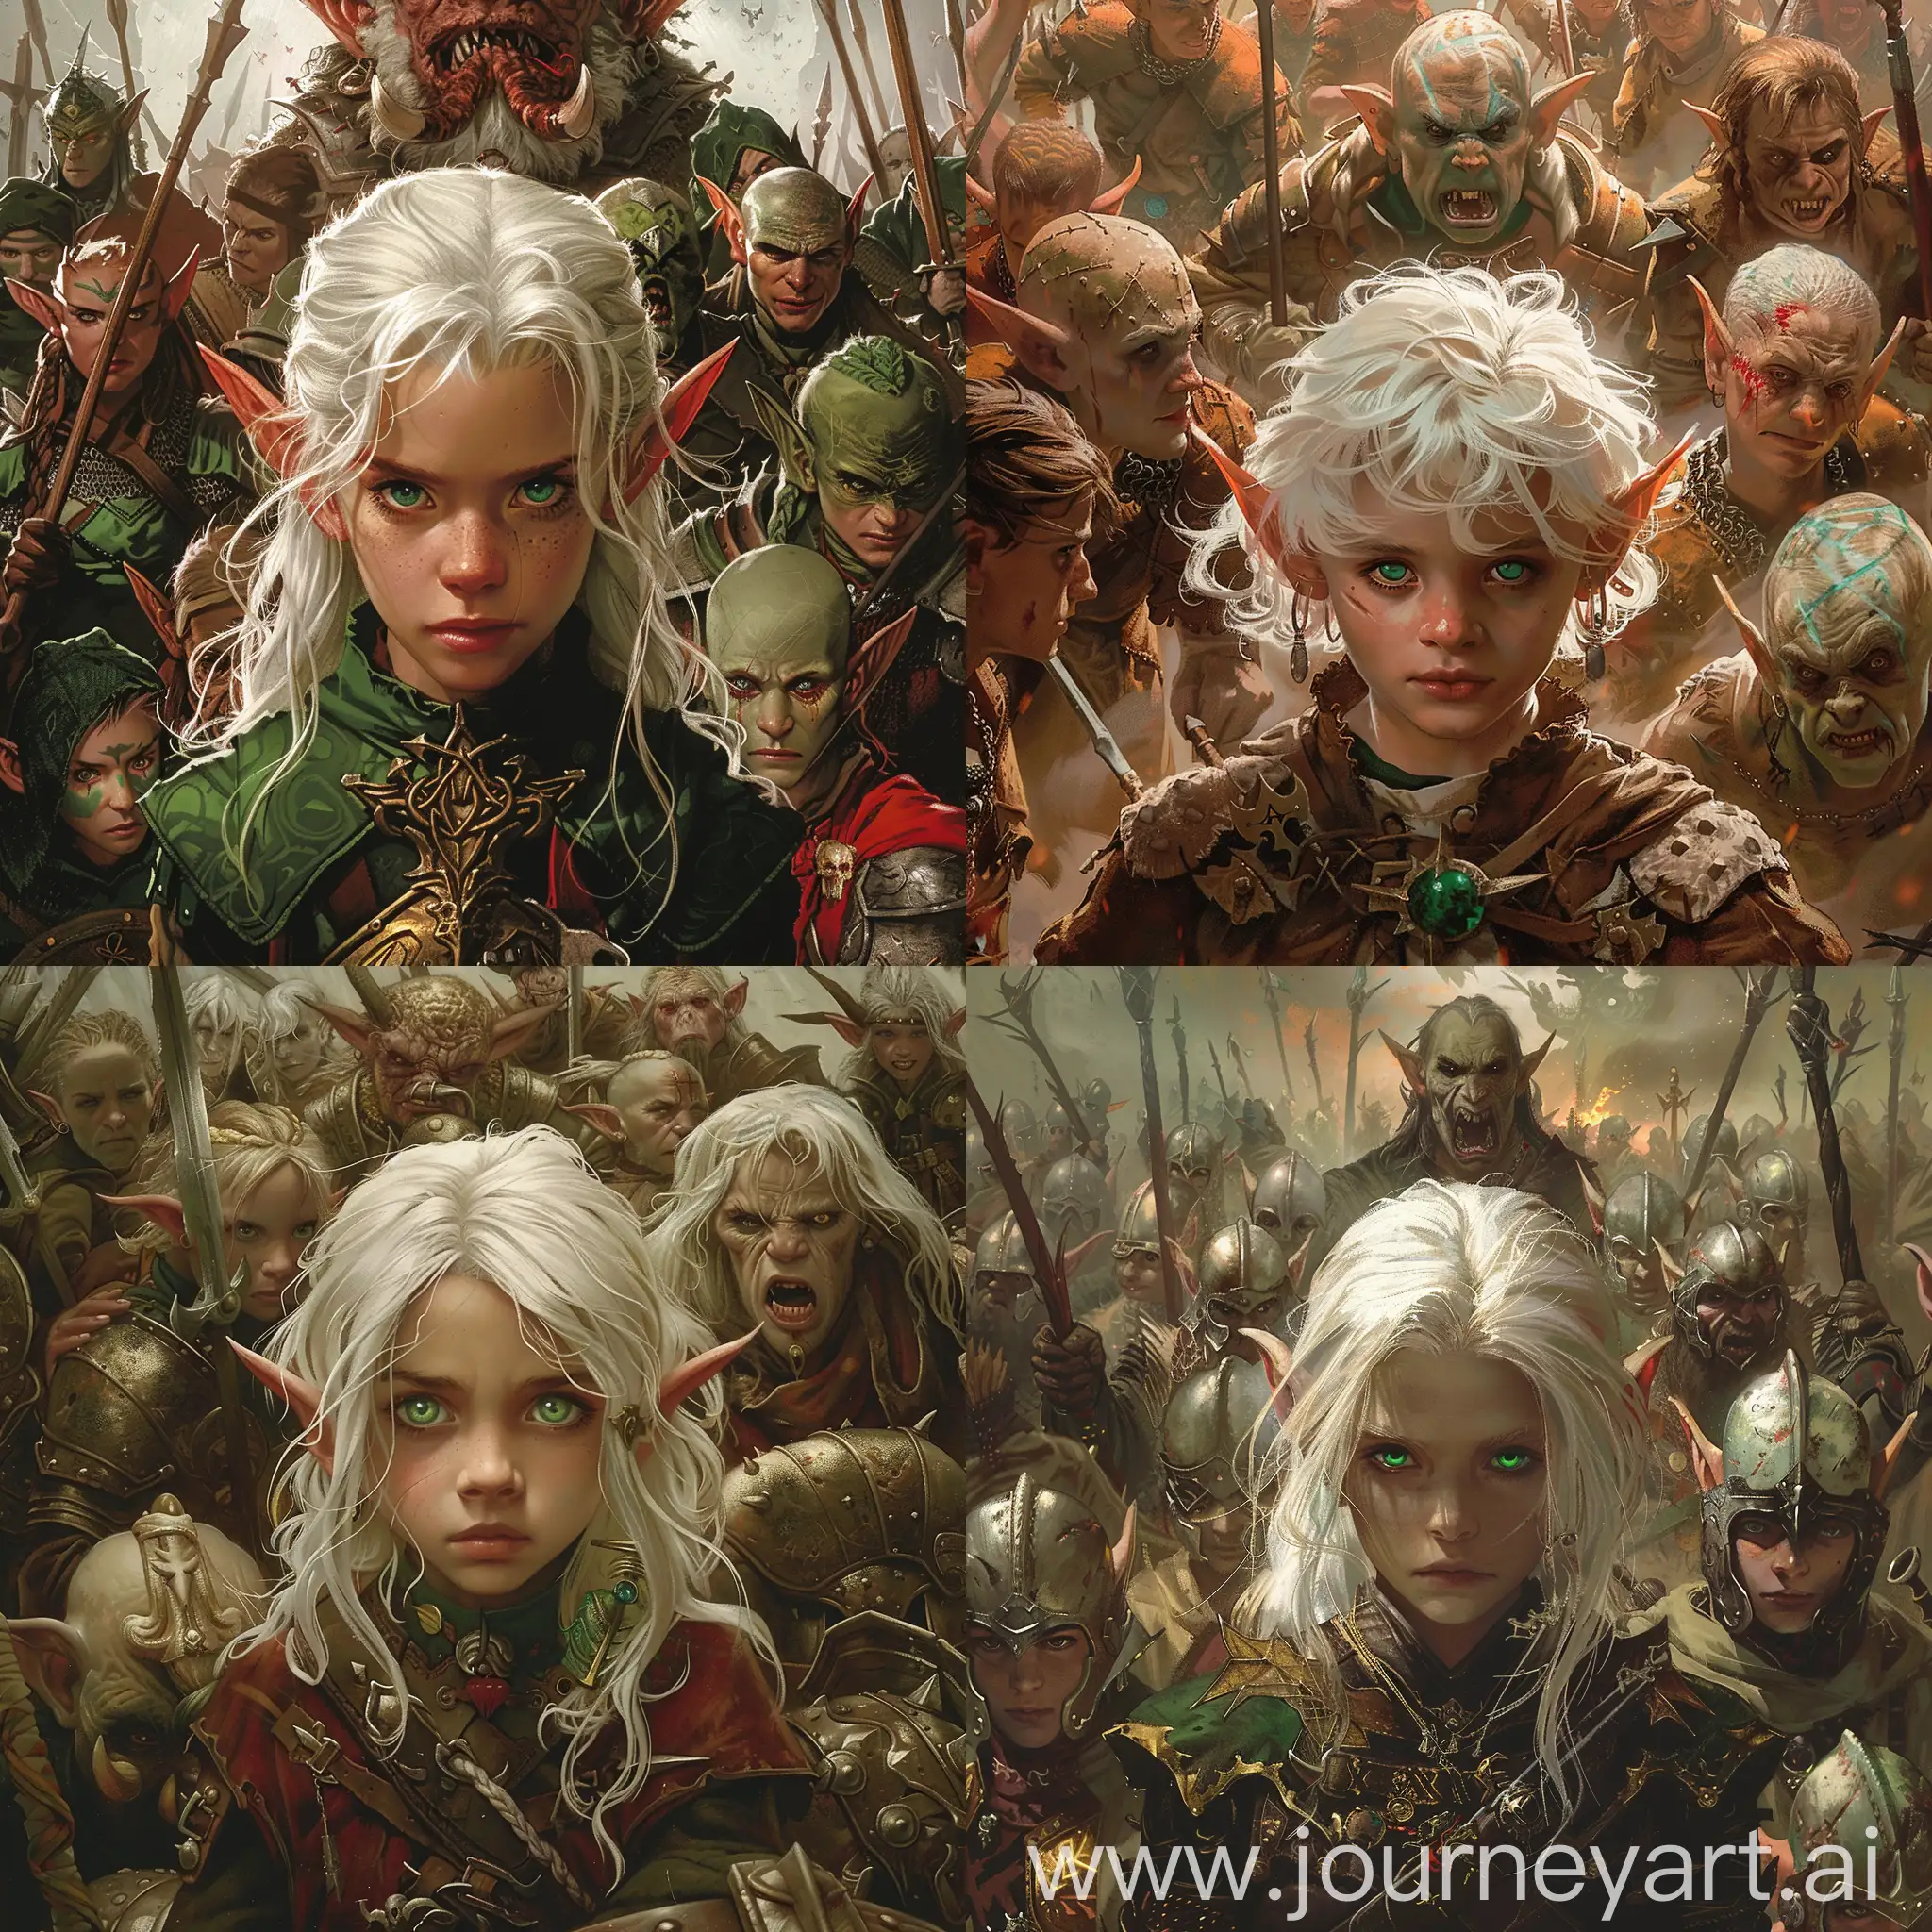 Mournful-Elf-Leader-Amidst-Warriors-and-Dark-Intrigue